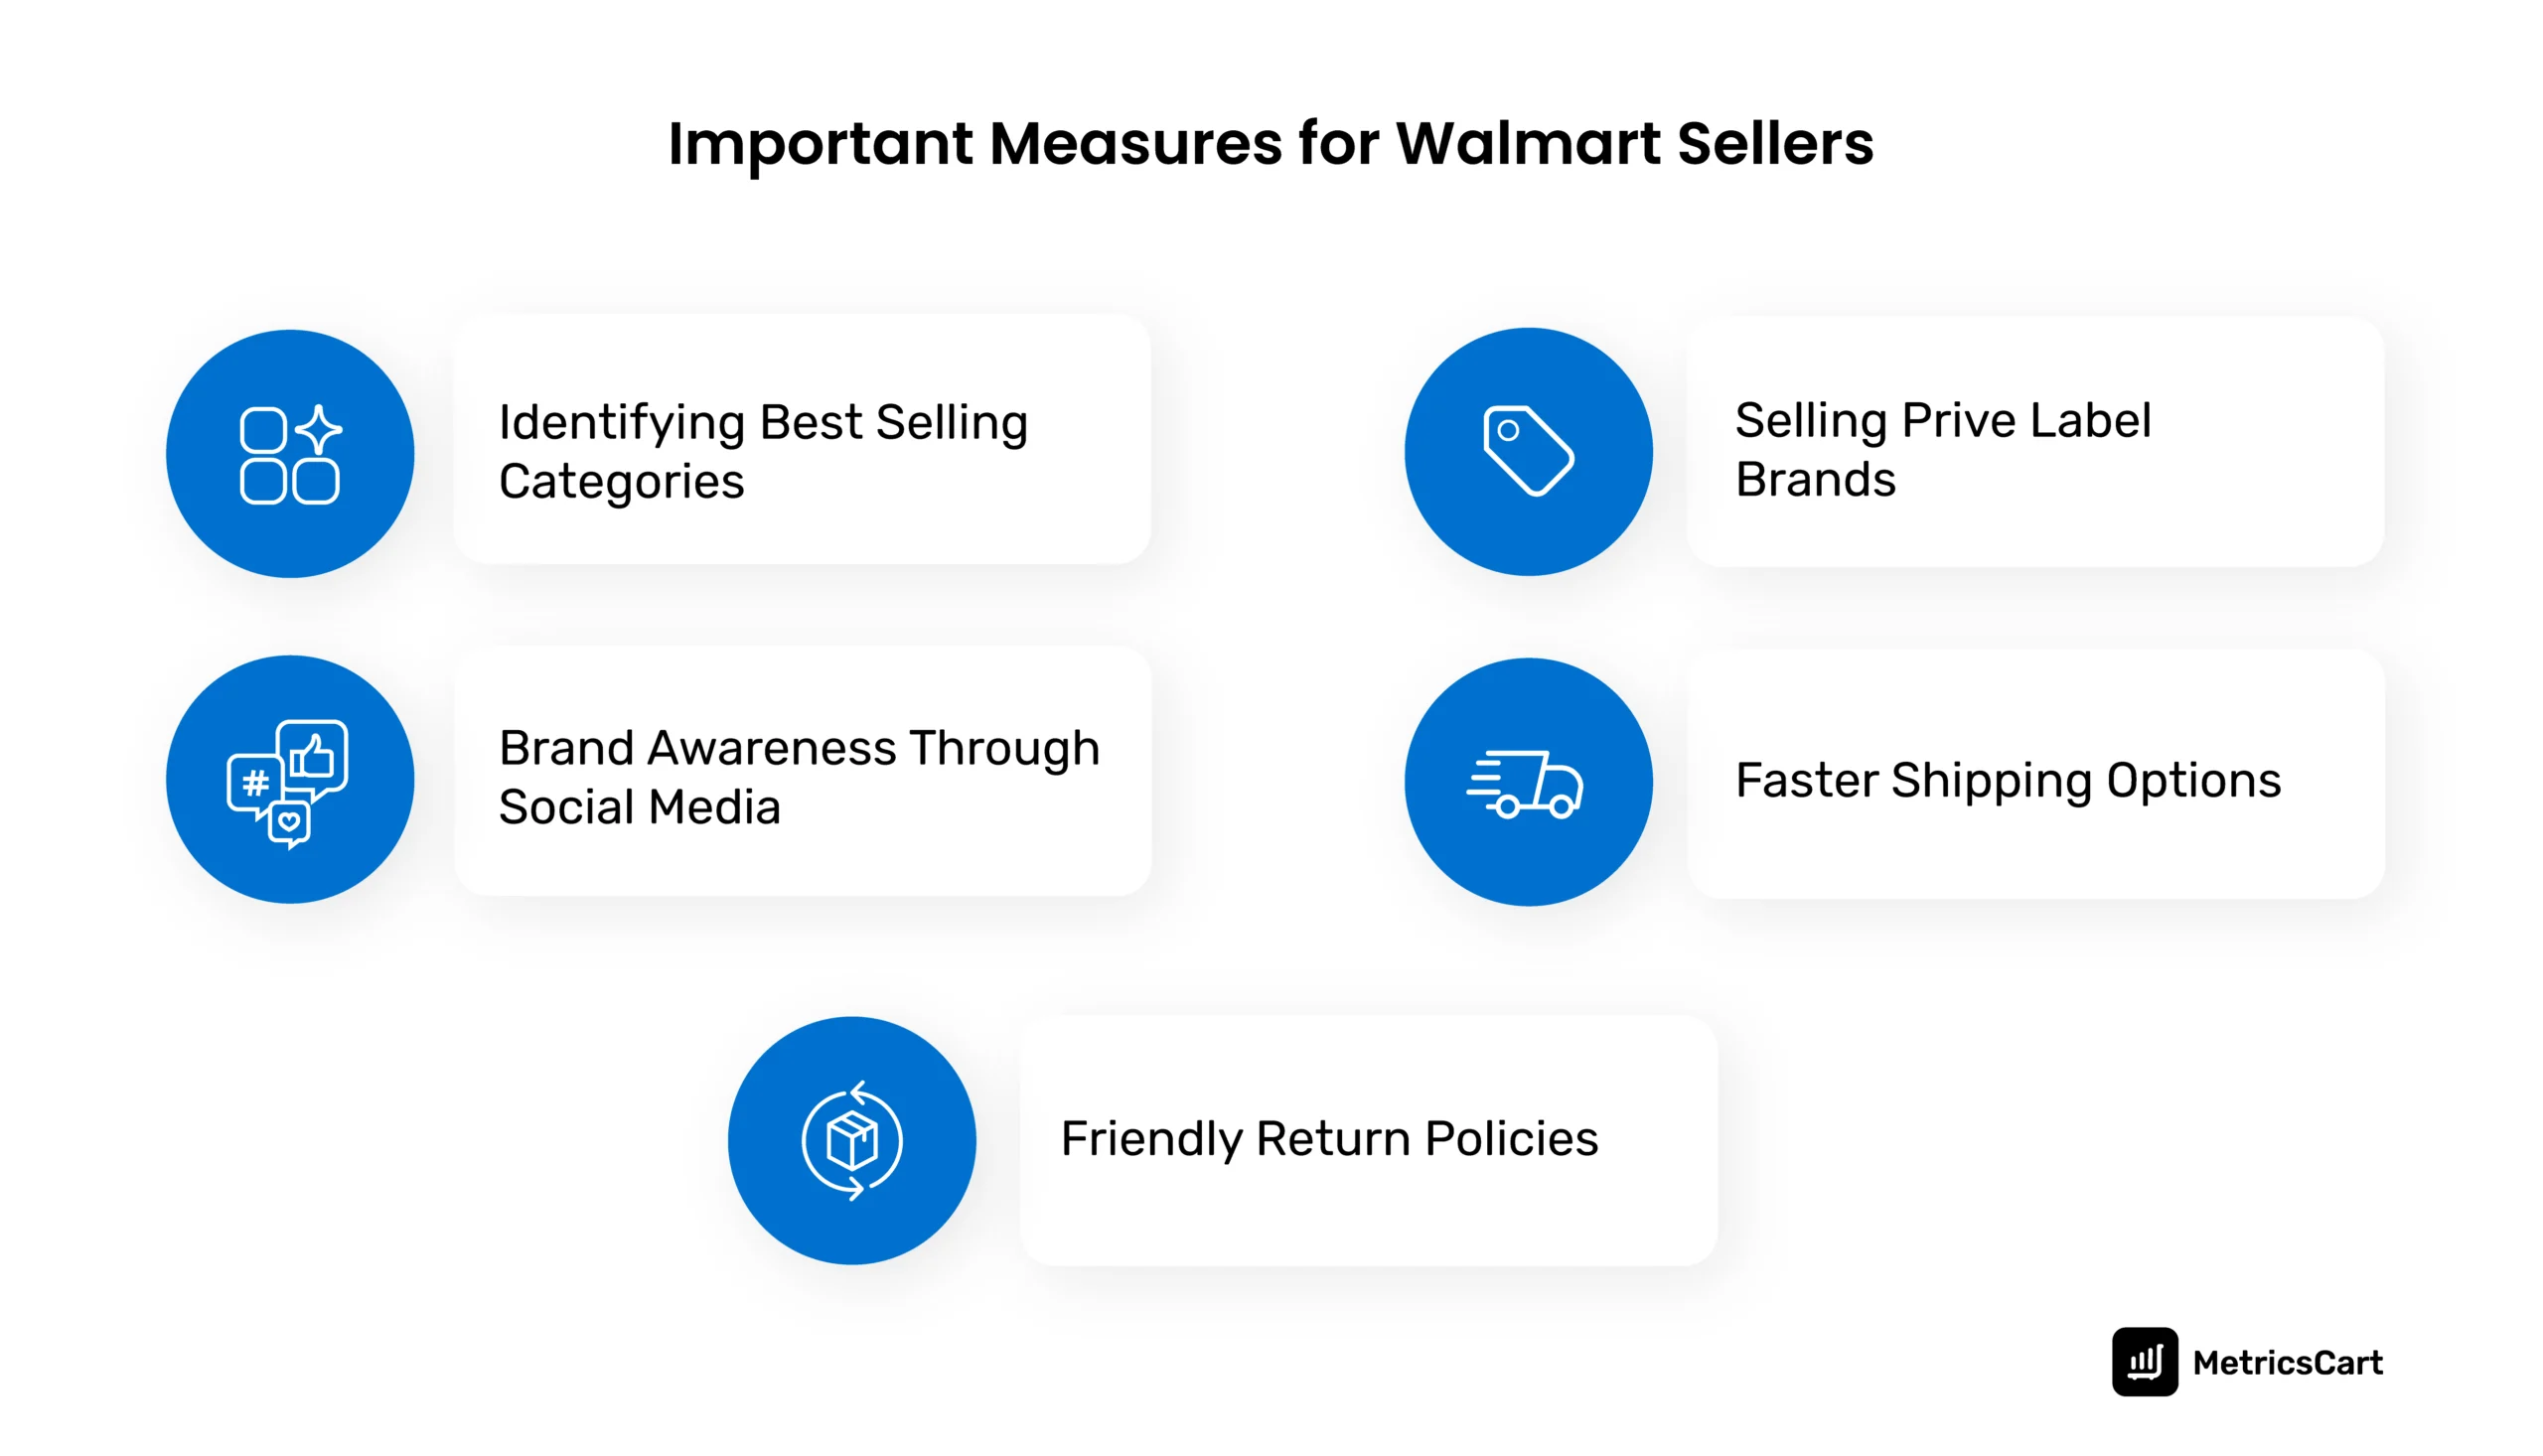 The important measures for Walmart sellers